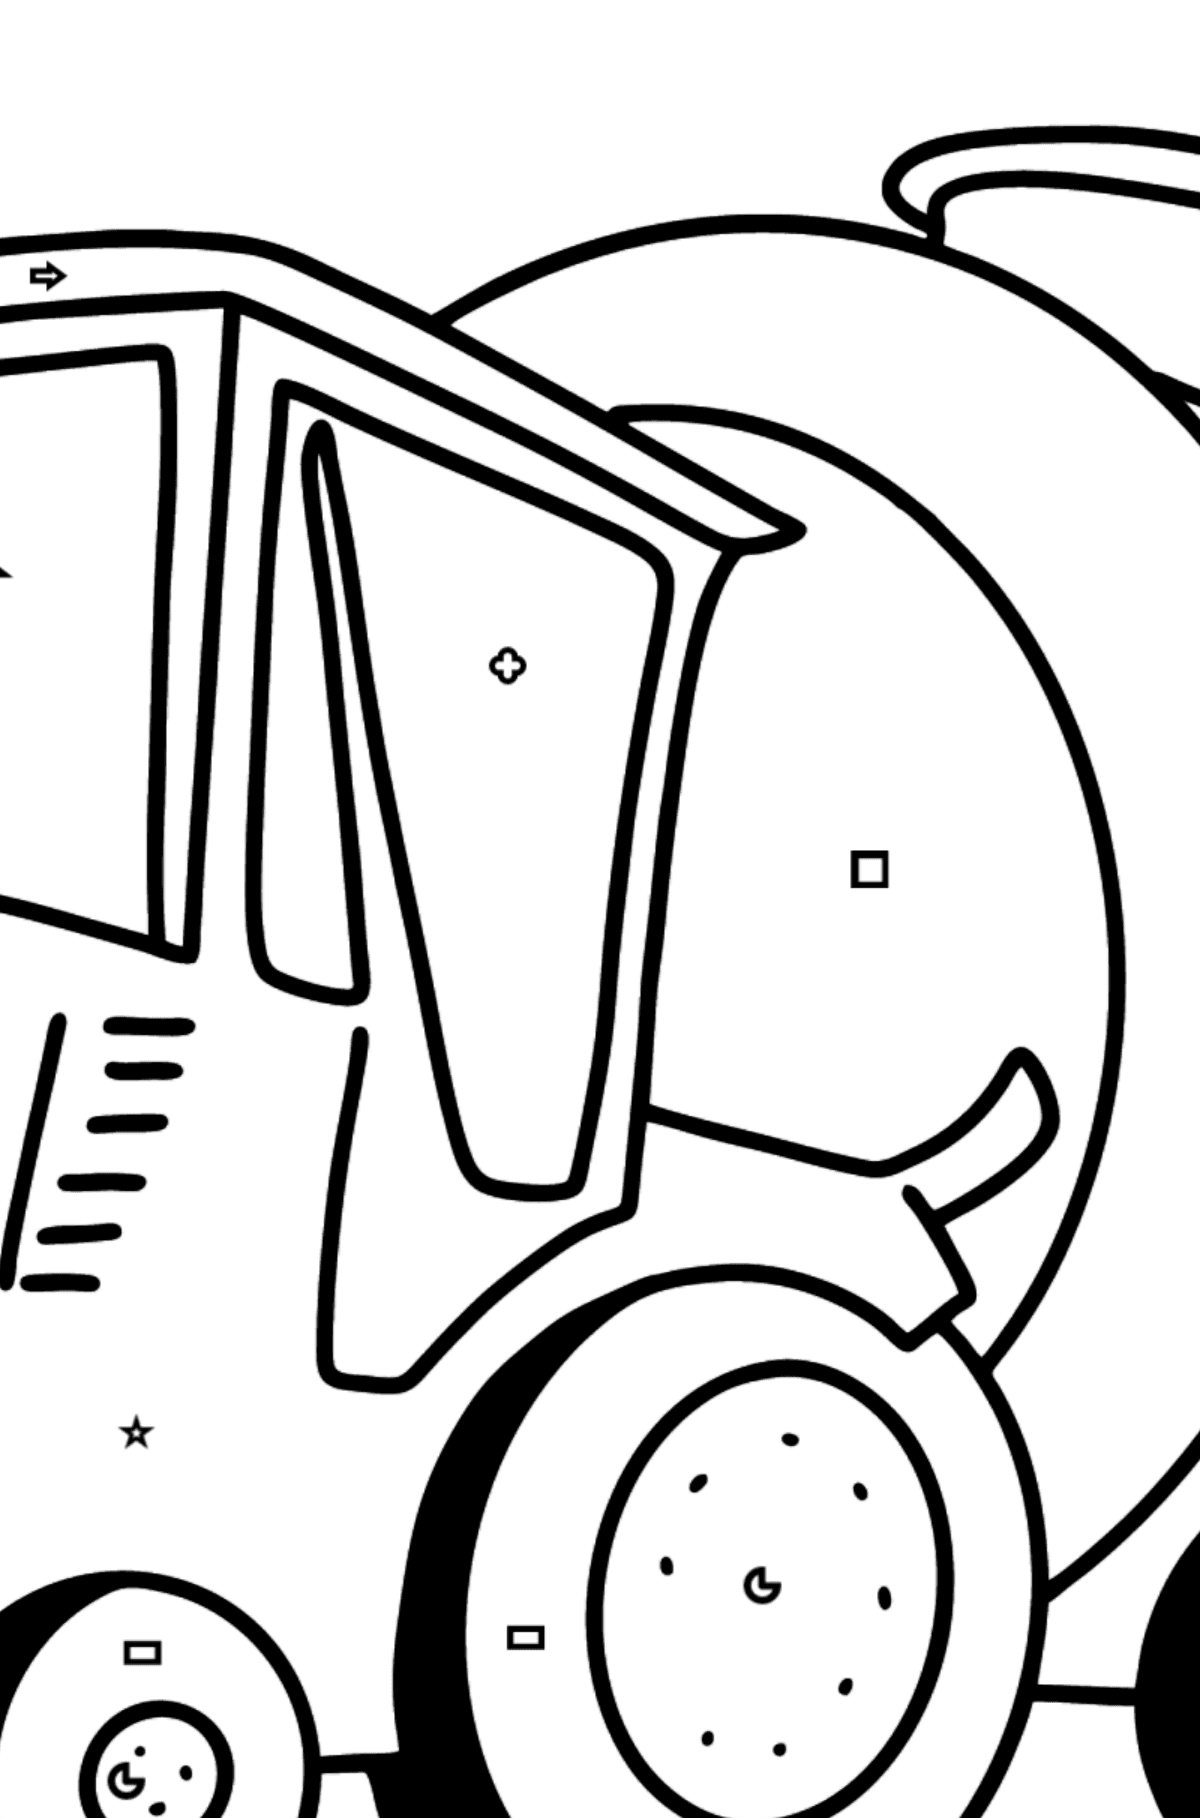 Tractor with Water Trailer coloring page ♥ Online or Printable!